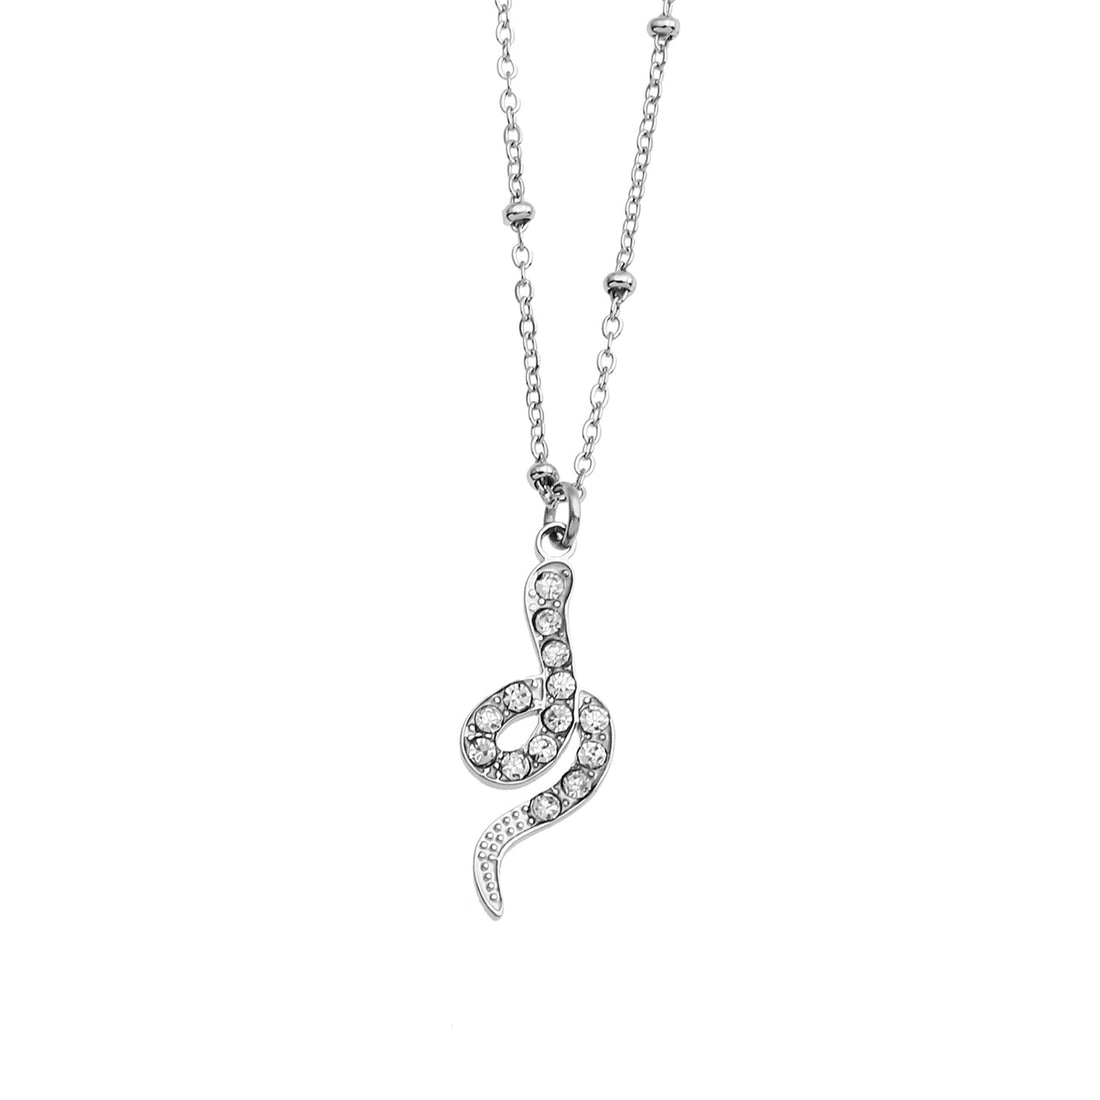 Hackney Nine RIHANNA Silver Beaded Chain Necklace with a Pavé Zirconia Serpent Pendant in Silver